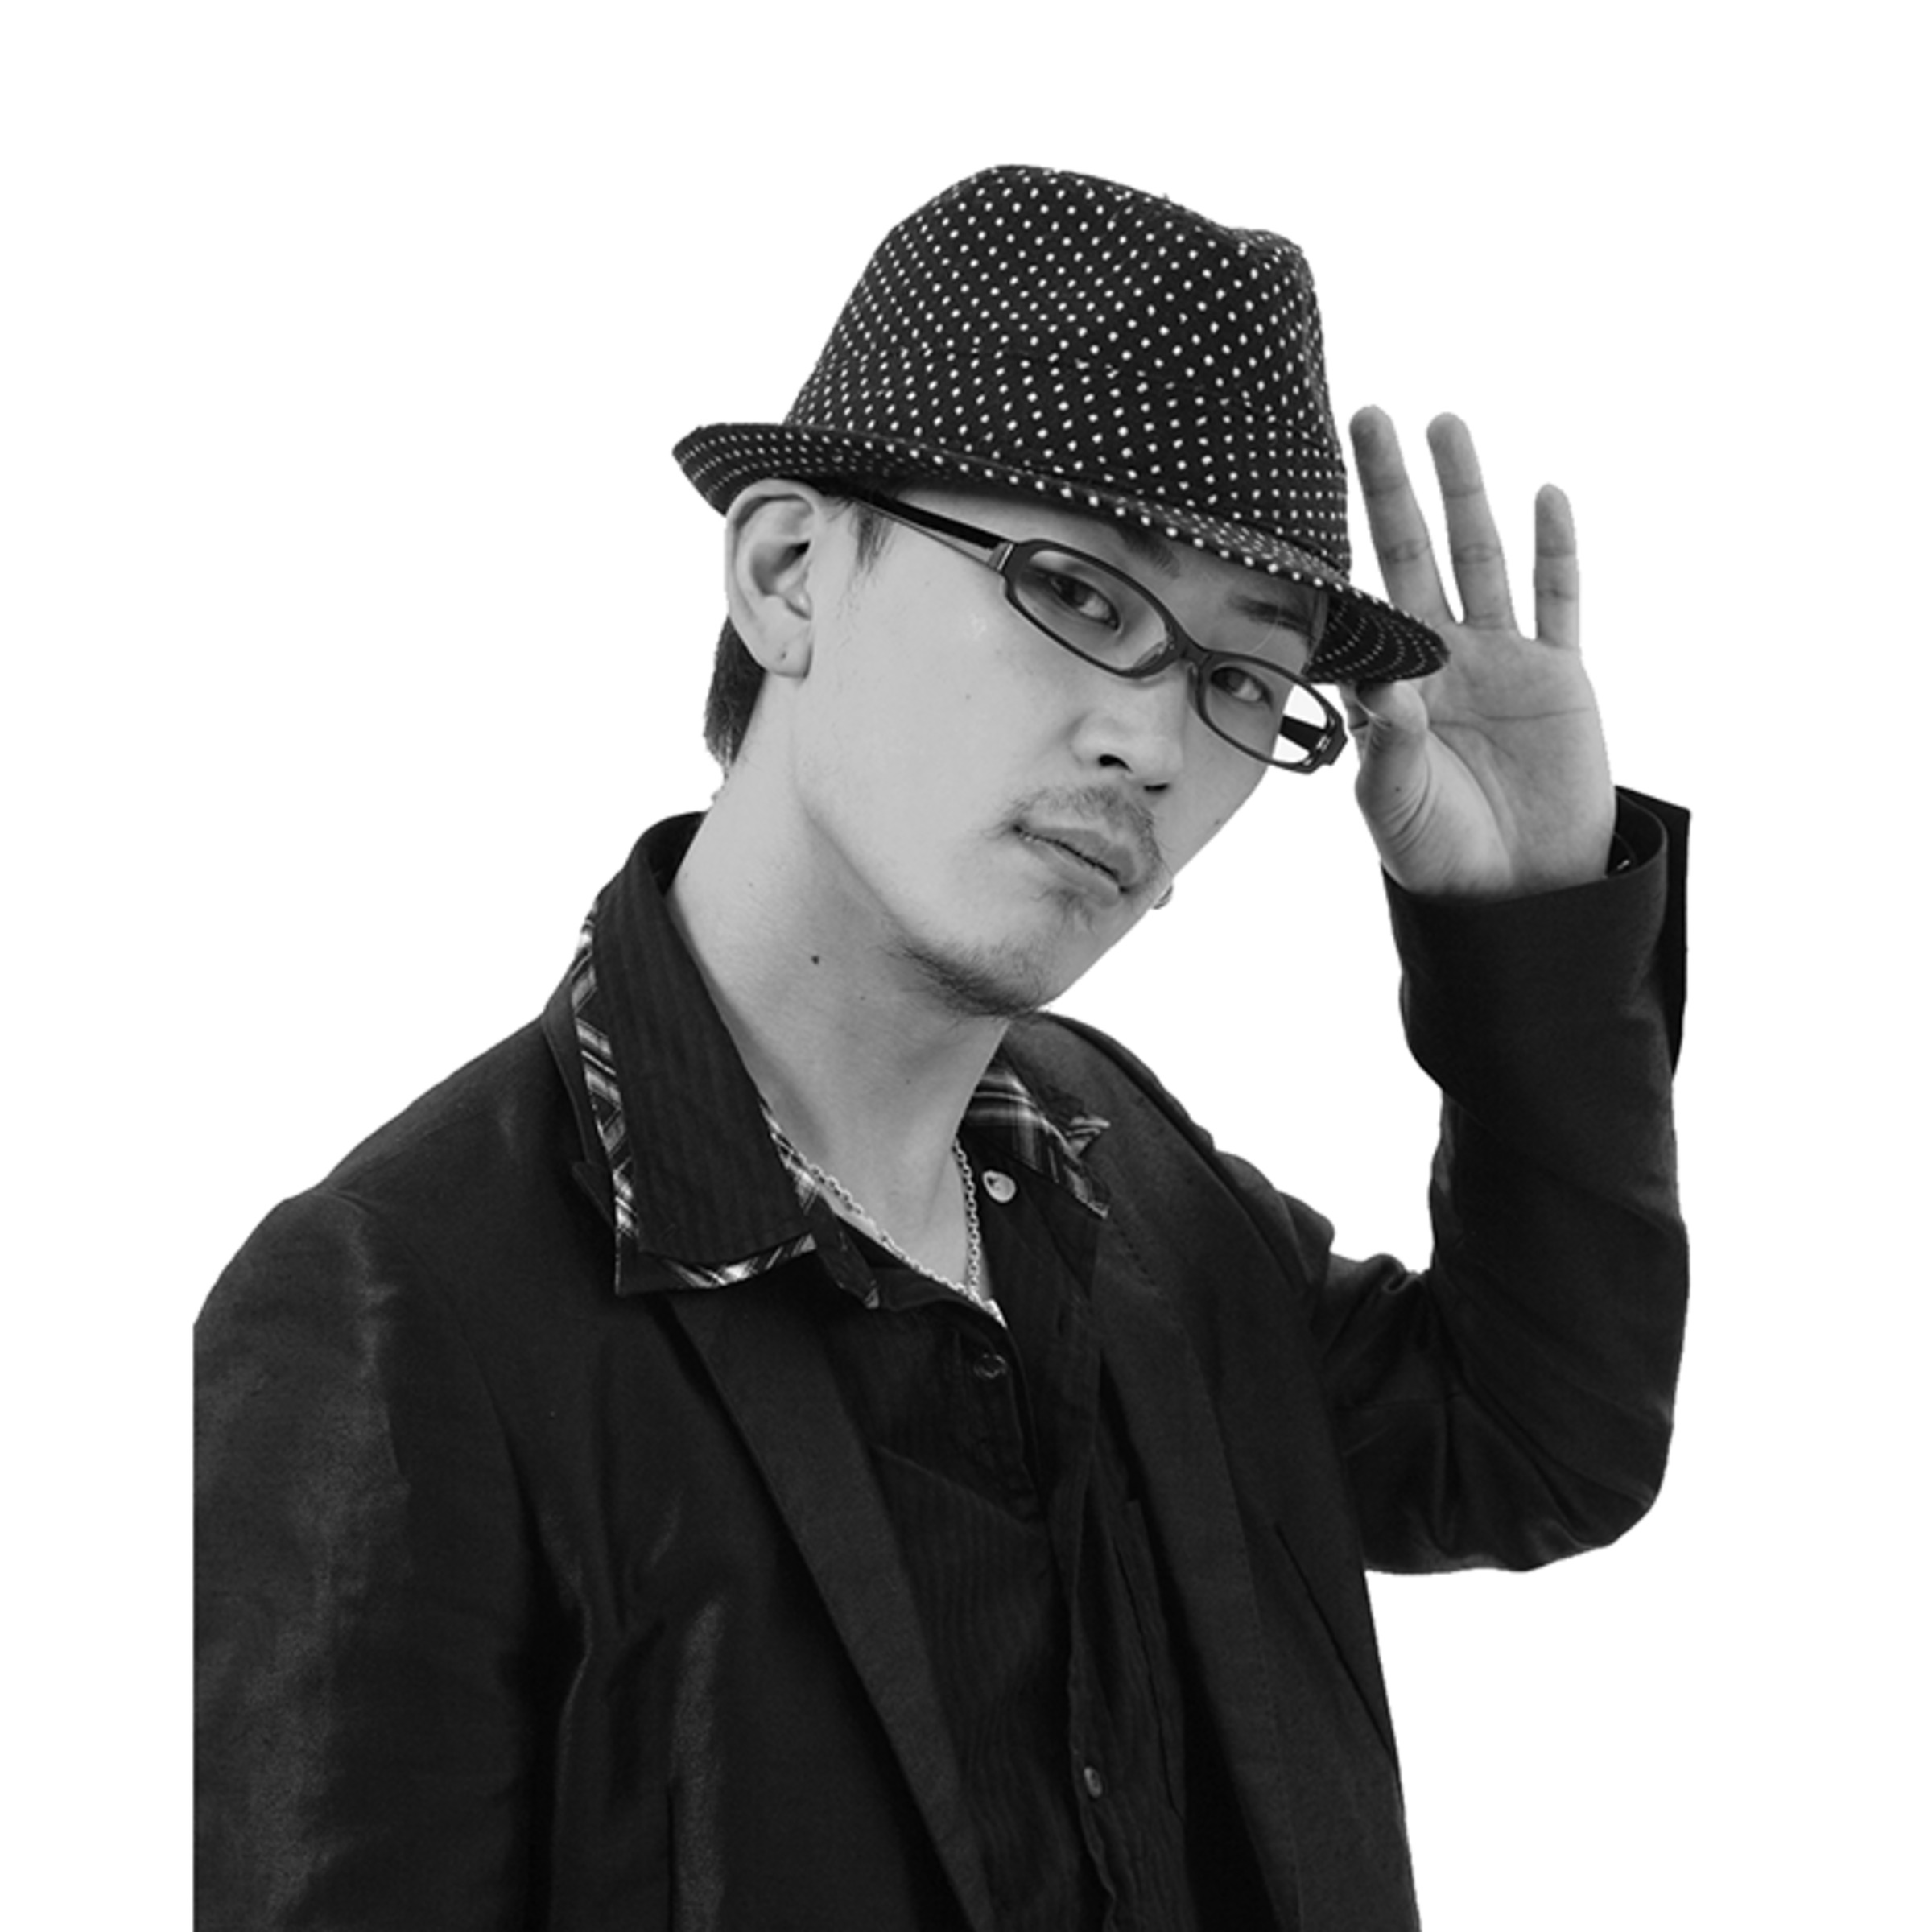 Toshi Dance Hiphop Avex Proworks